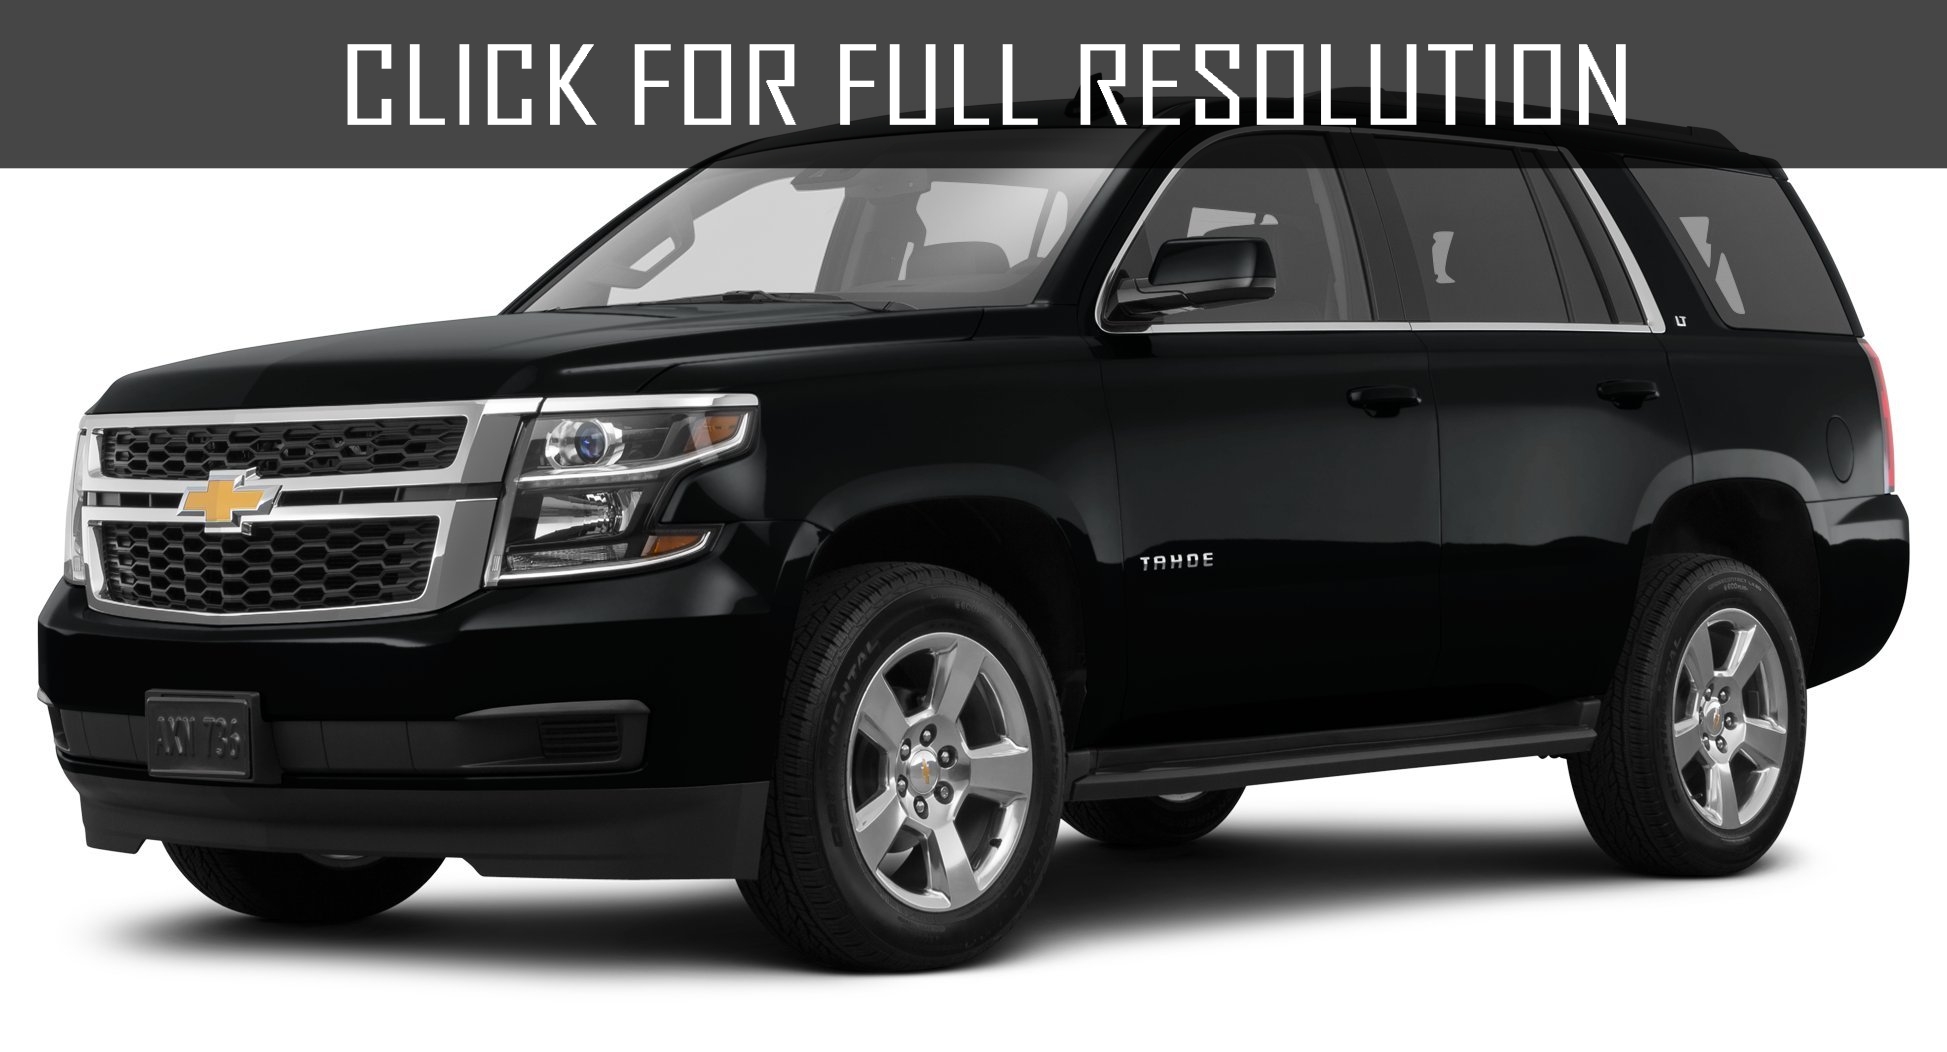 Chevrolet Tahoe Black Edition amazing photo gallery, some information